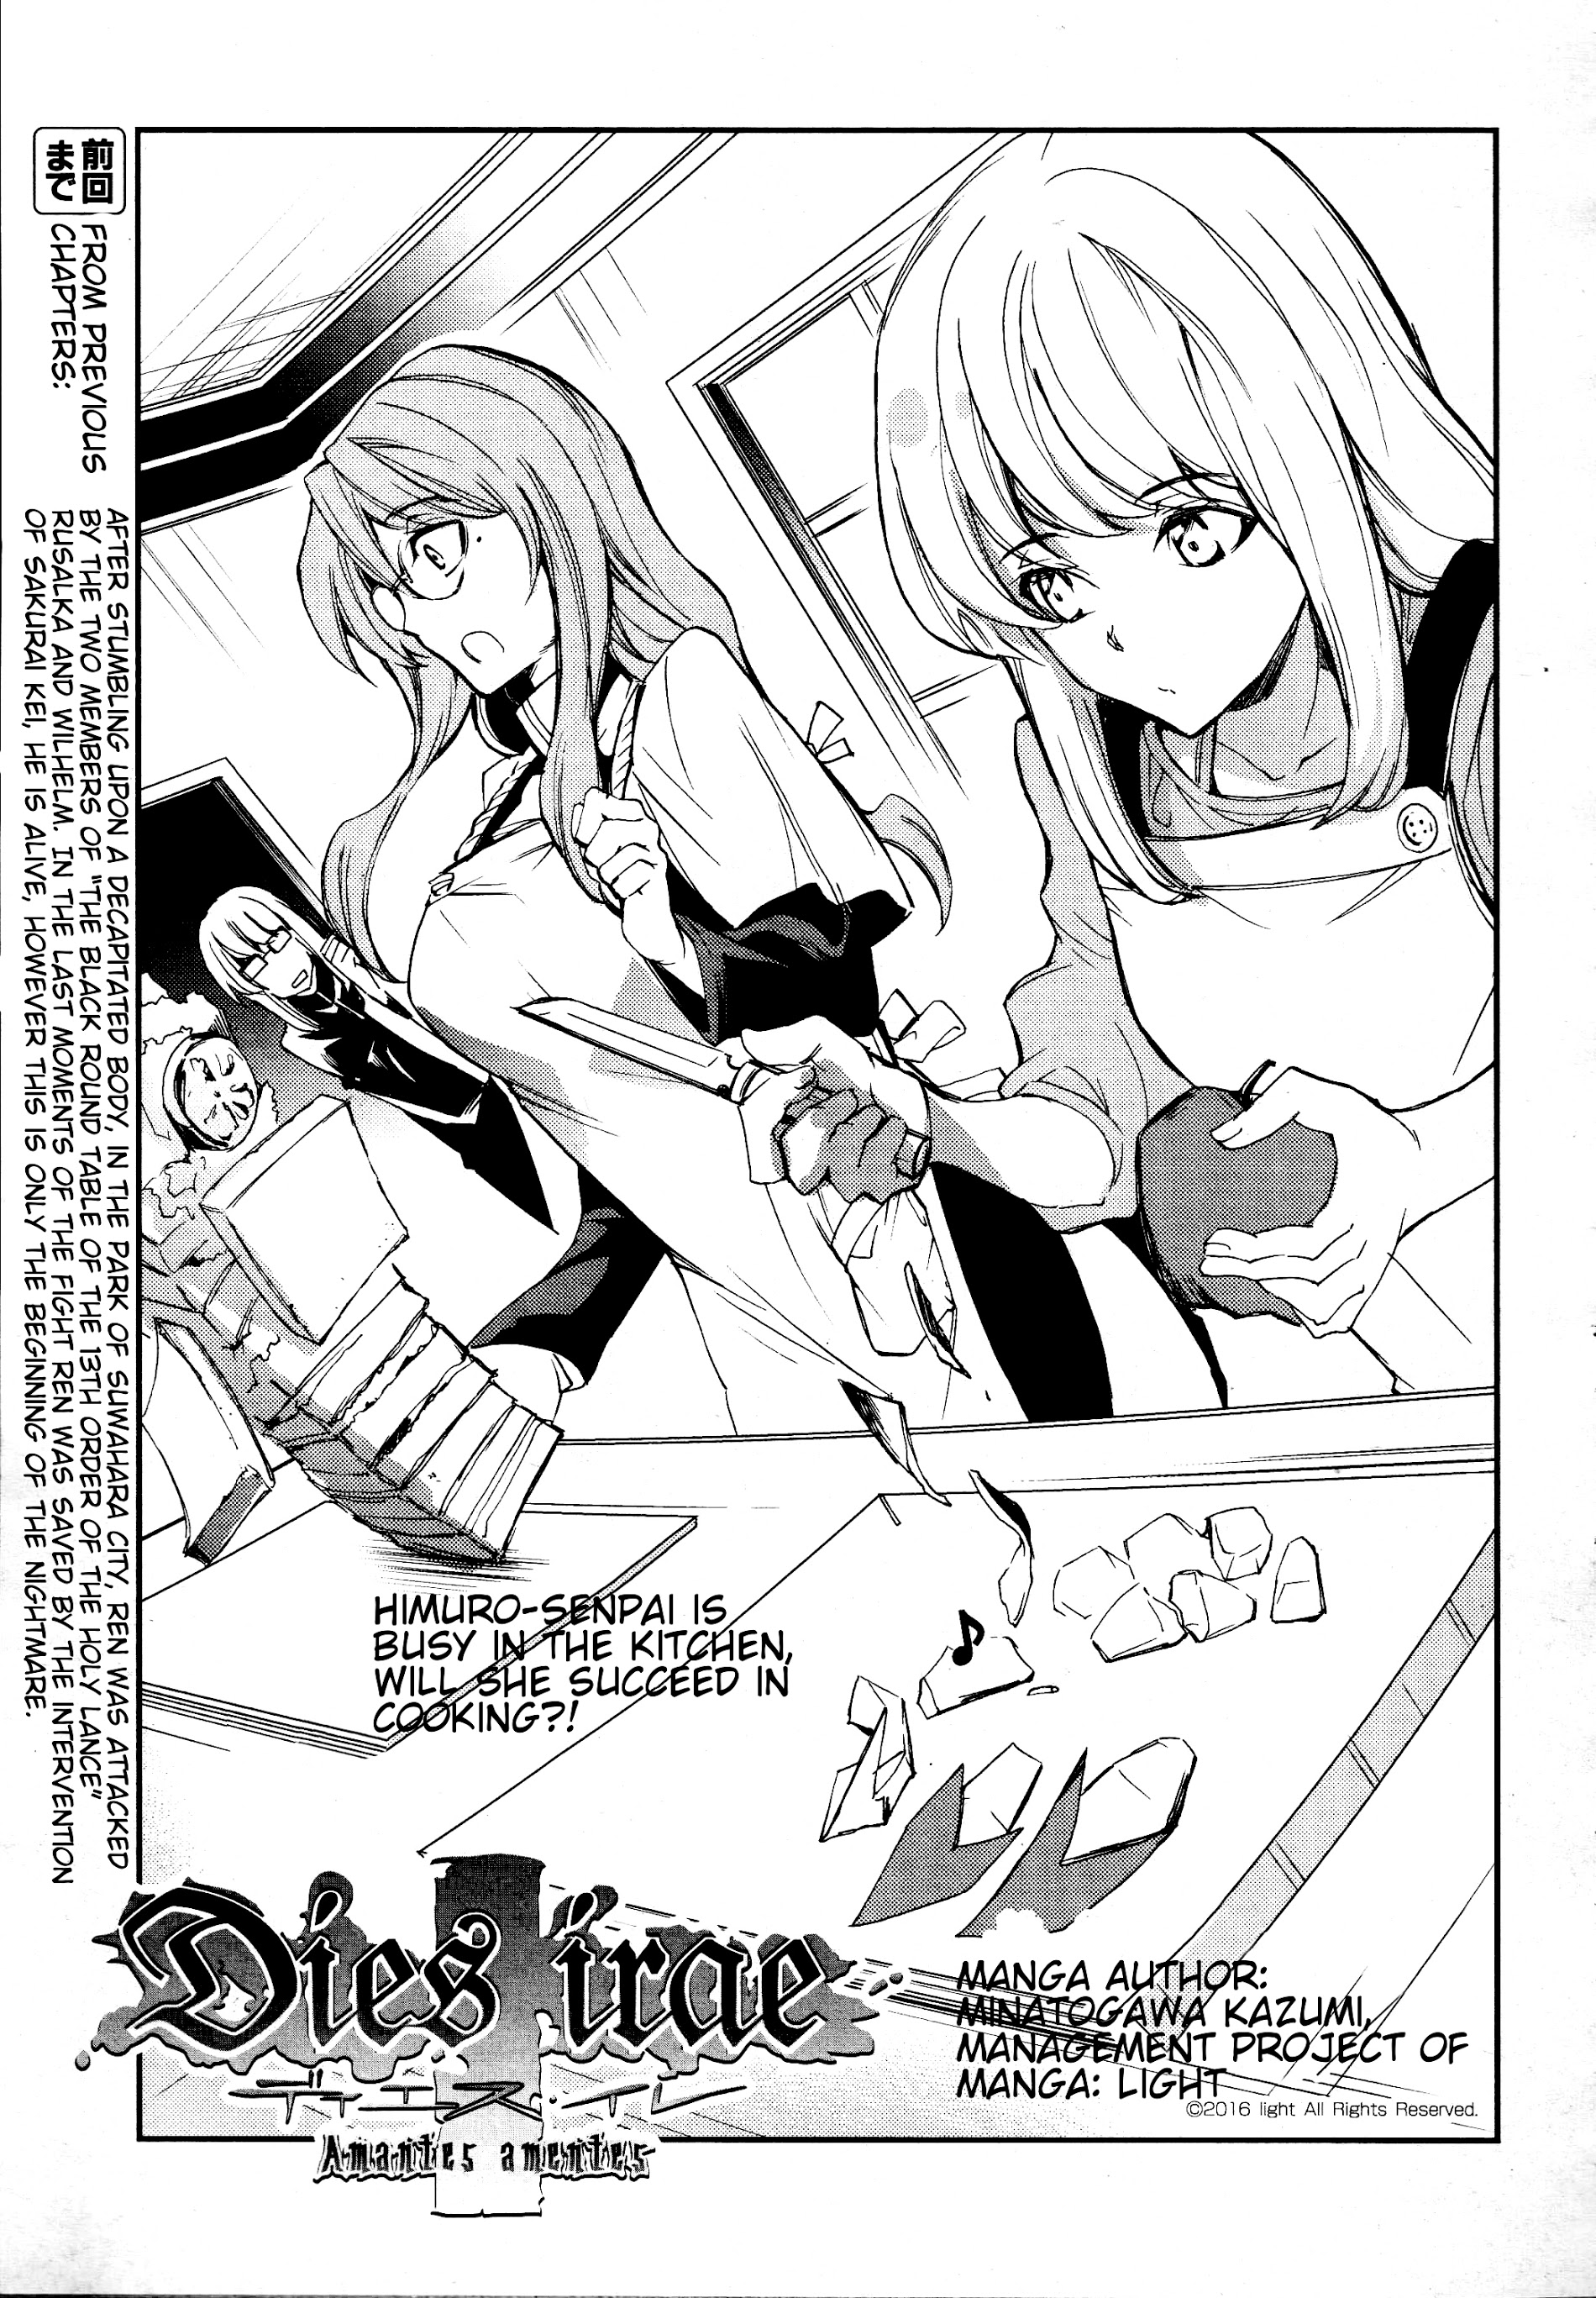 Dies Irae - Amantes Amentes Chapter 4 #1